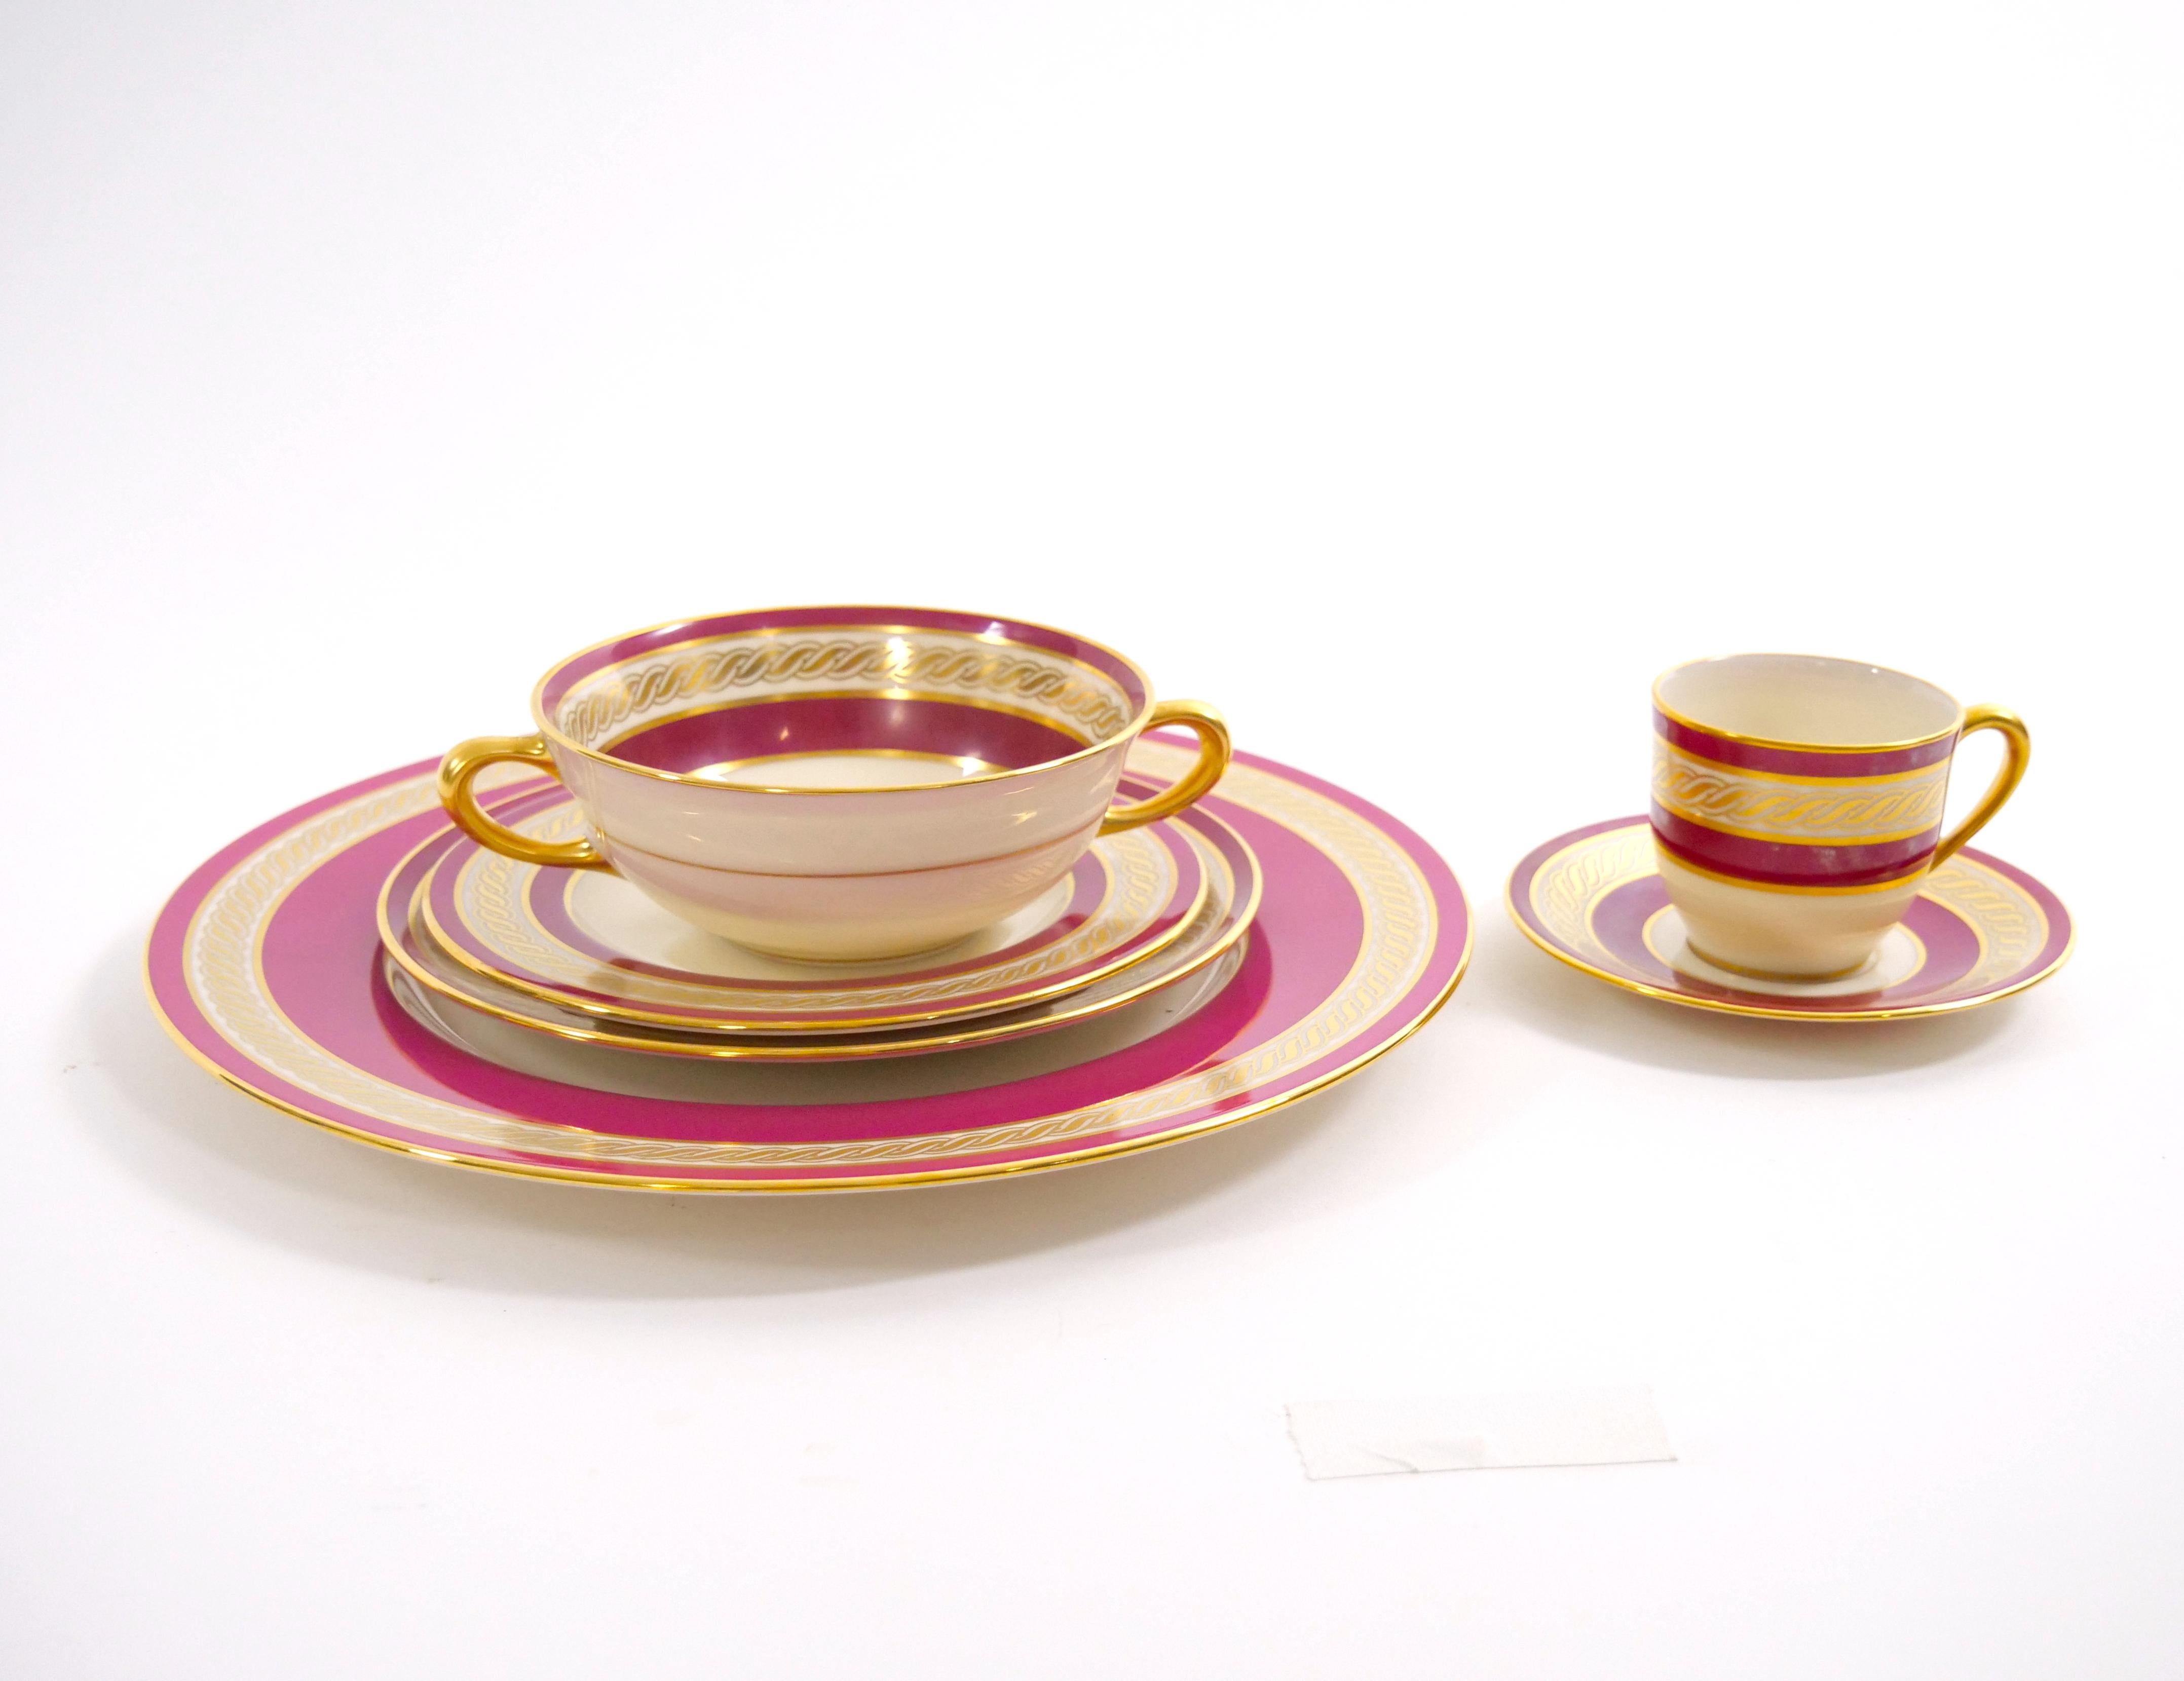 American Porcelain/Gilt Braid Decorated By Lenox for J.E Caldwell Dinner Set For Sale 9